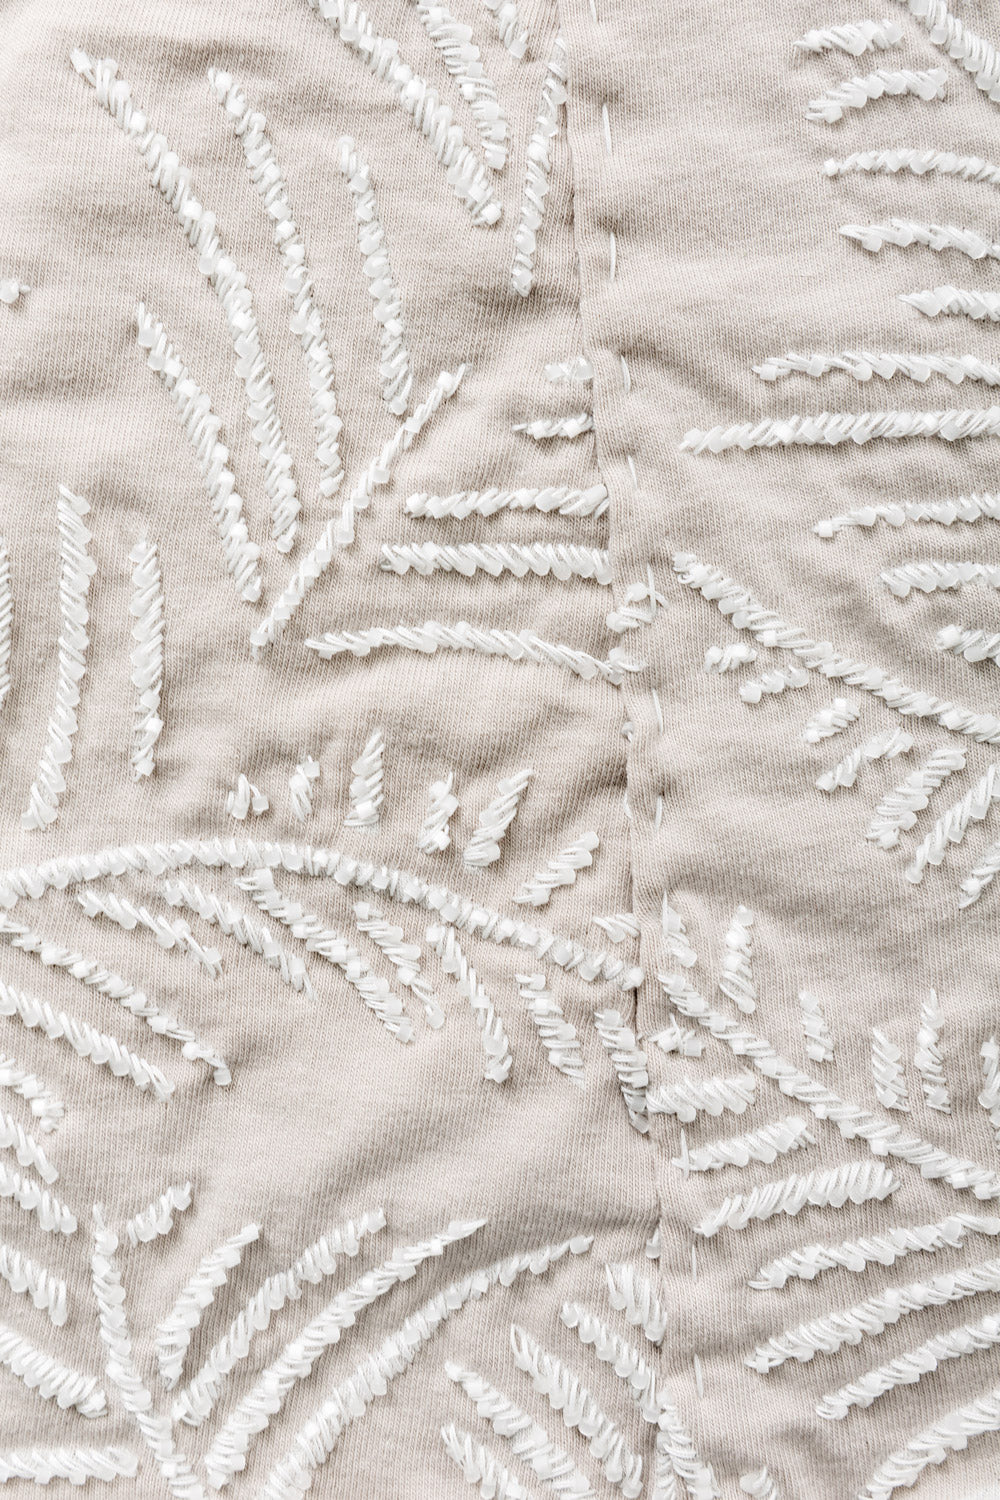 Detail of beaded fern embroidery. 